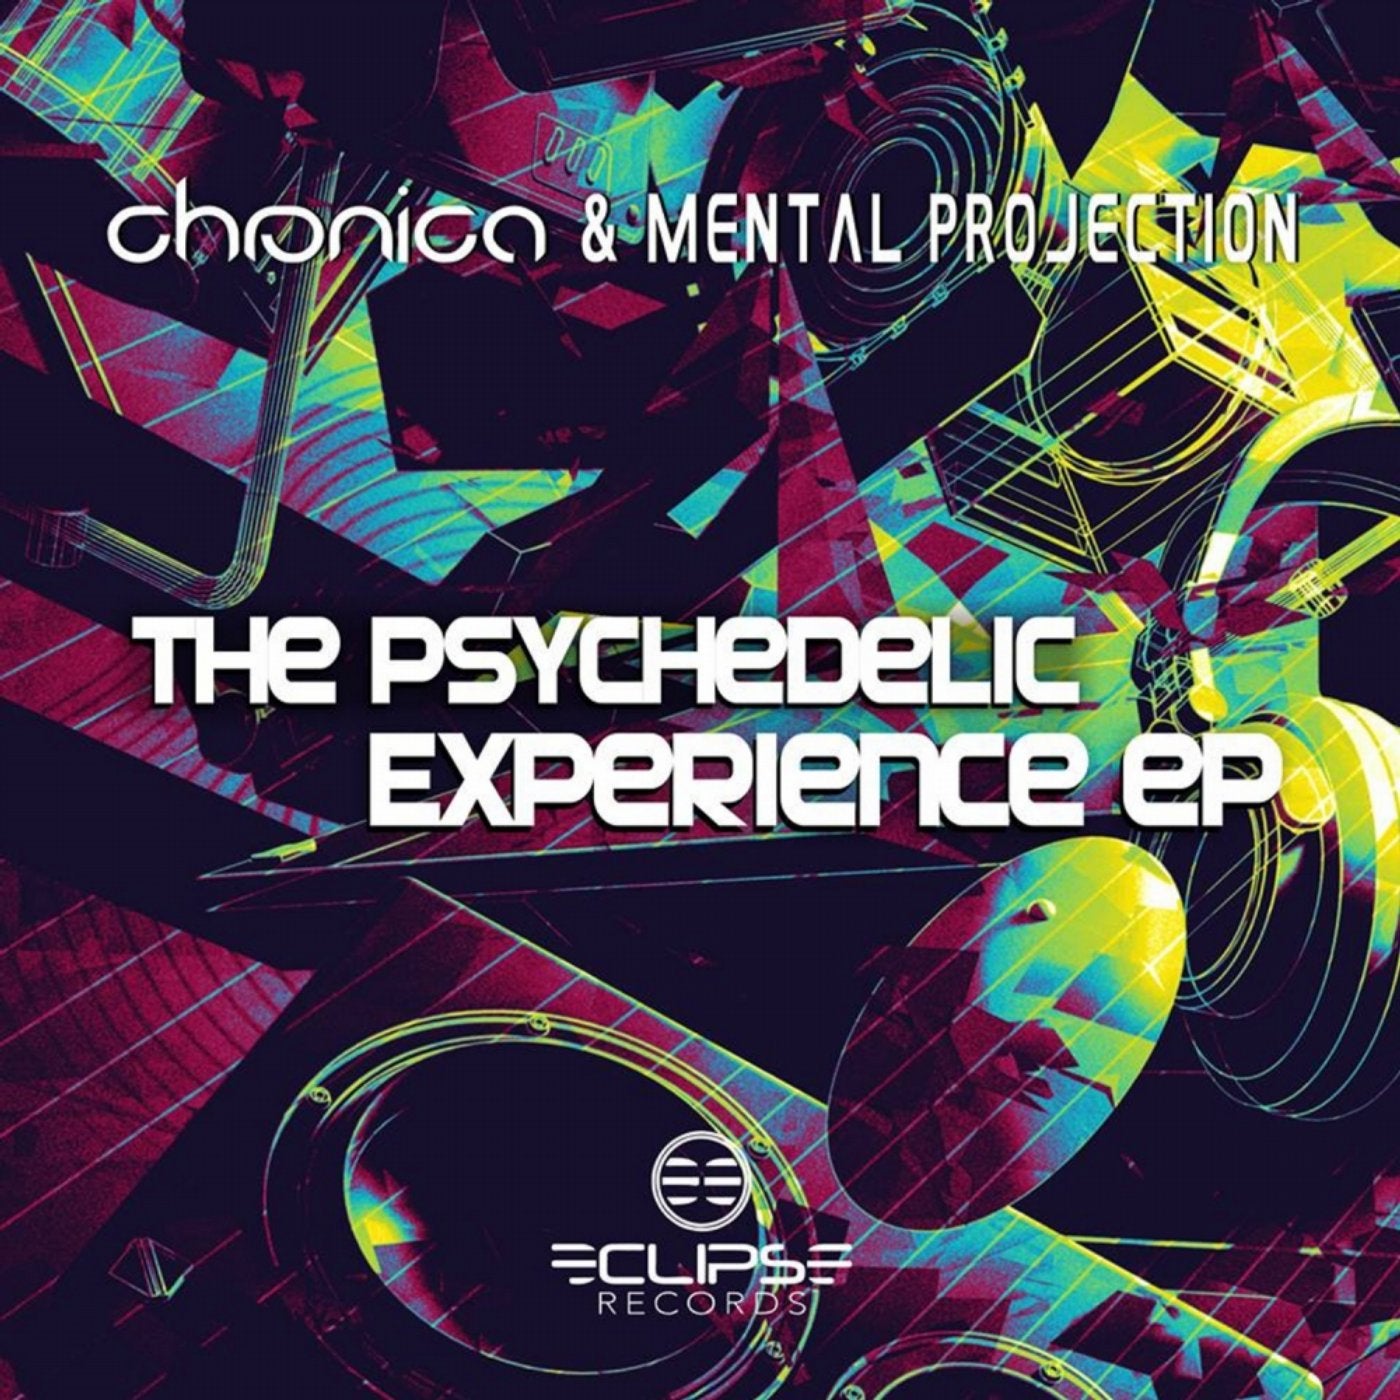 The Psychedelic Experience EP